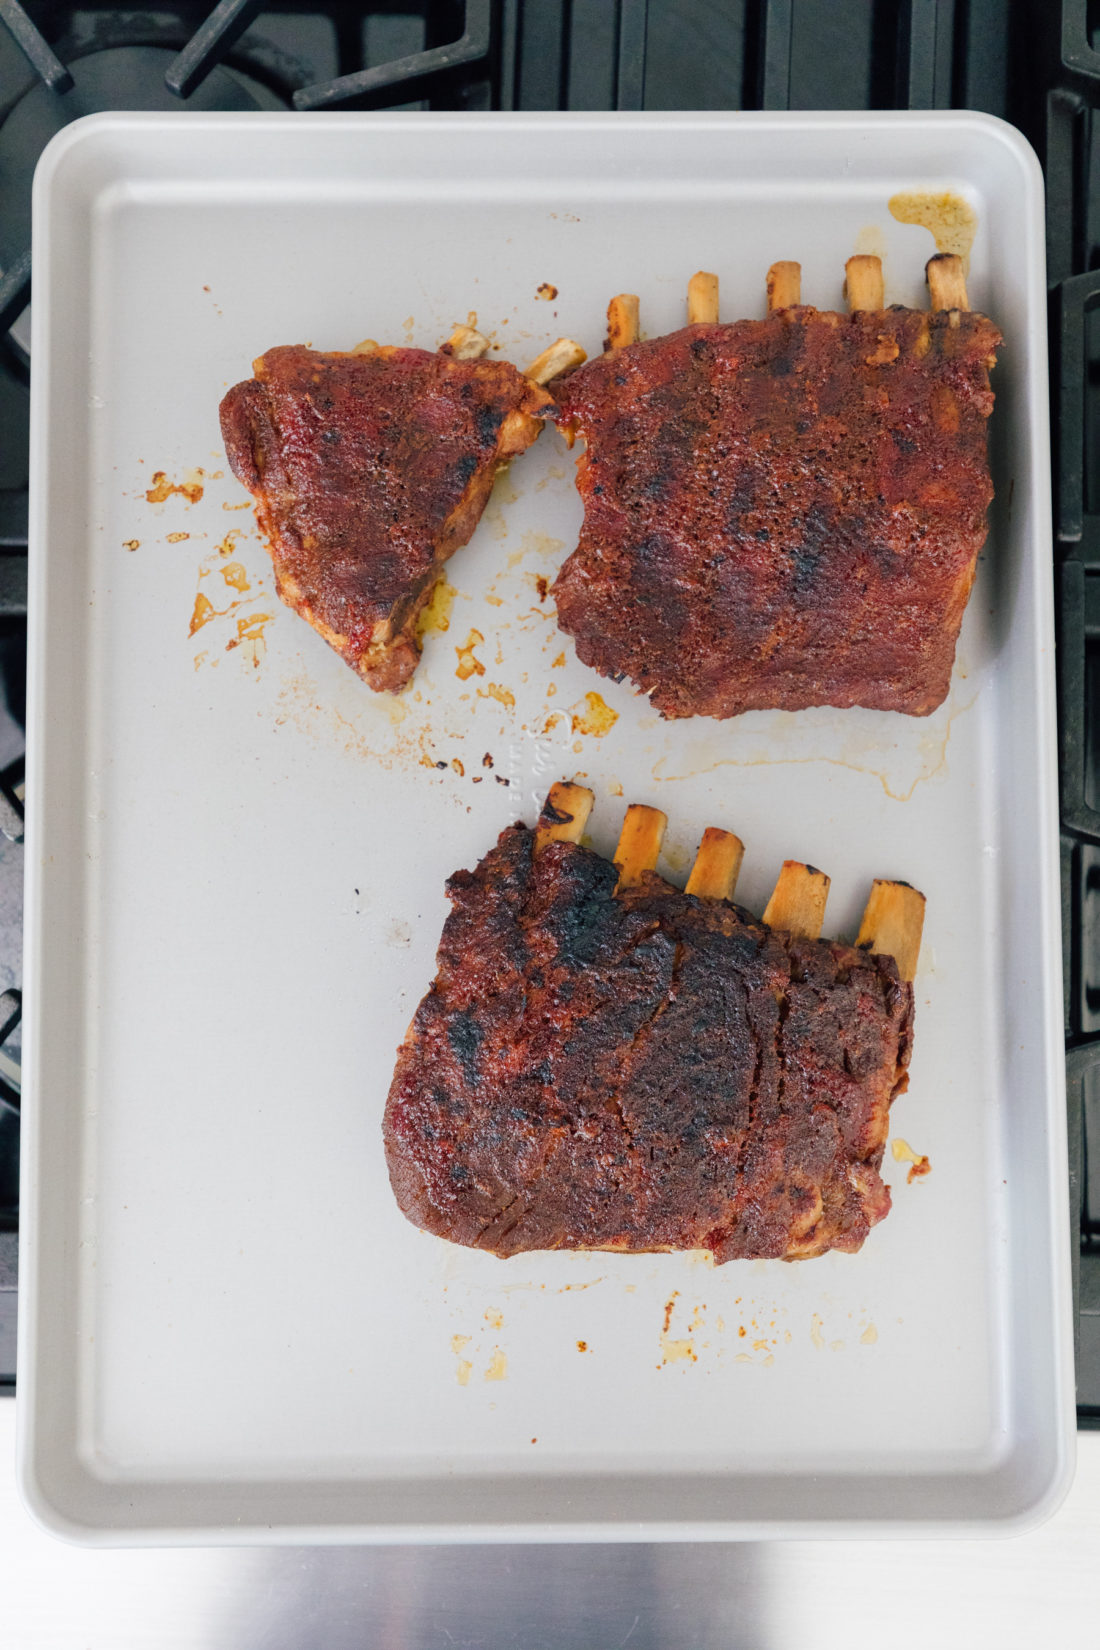 Eva Amurri Martino's dry rub ribs before adding her Stone Fruit BBQ Sauce and throwing them in the broiler